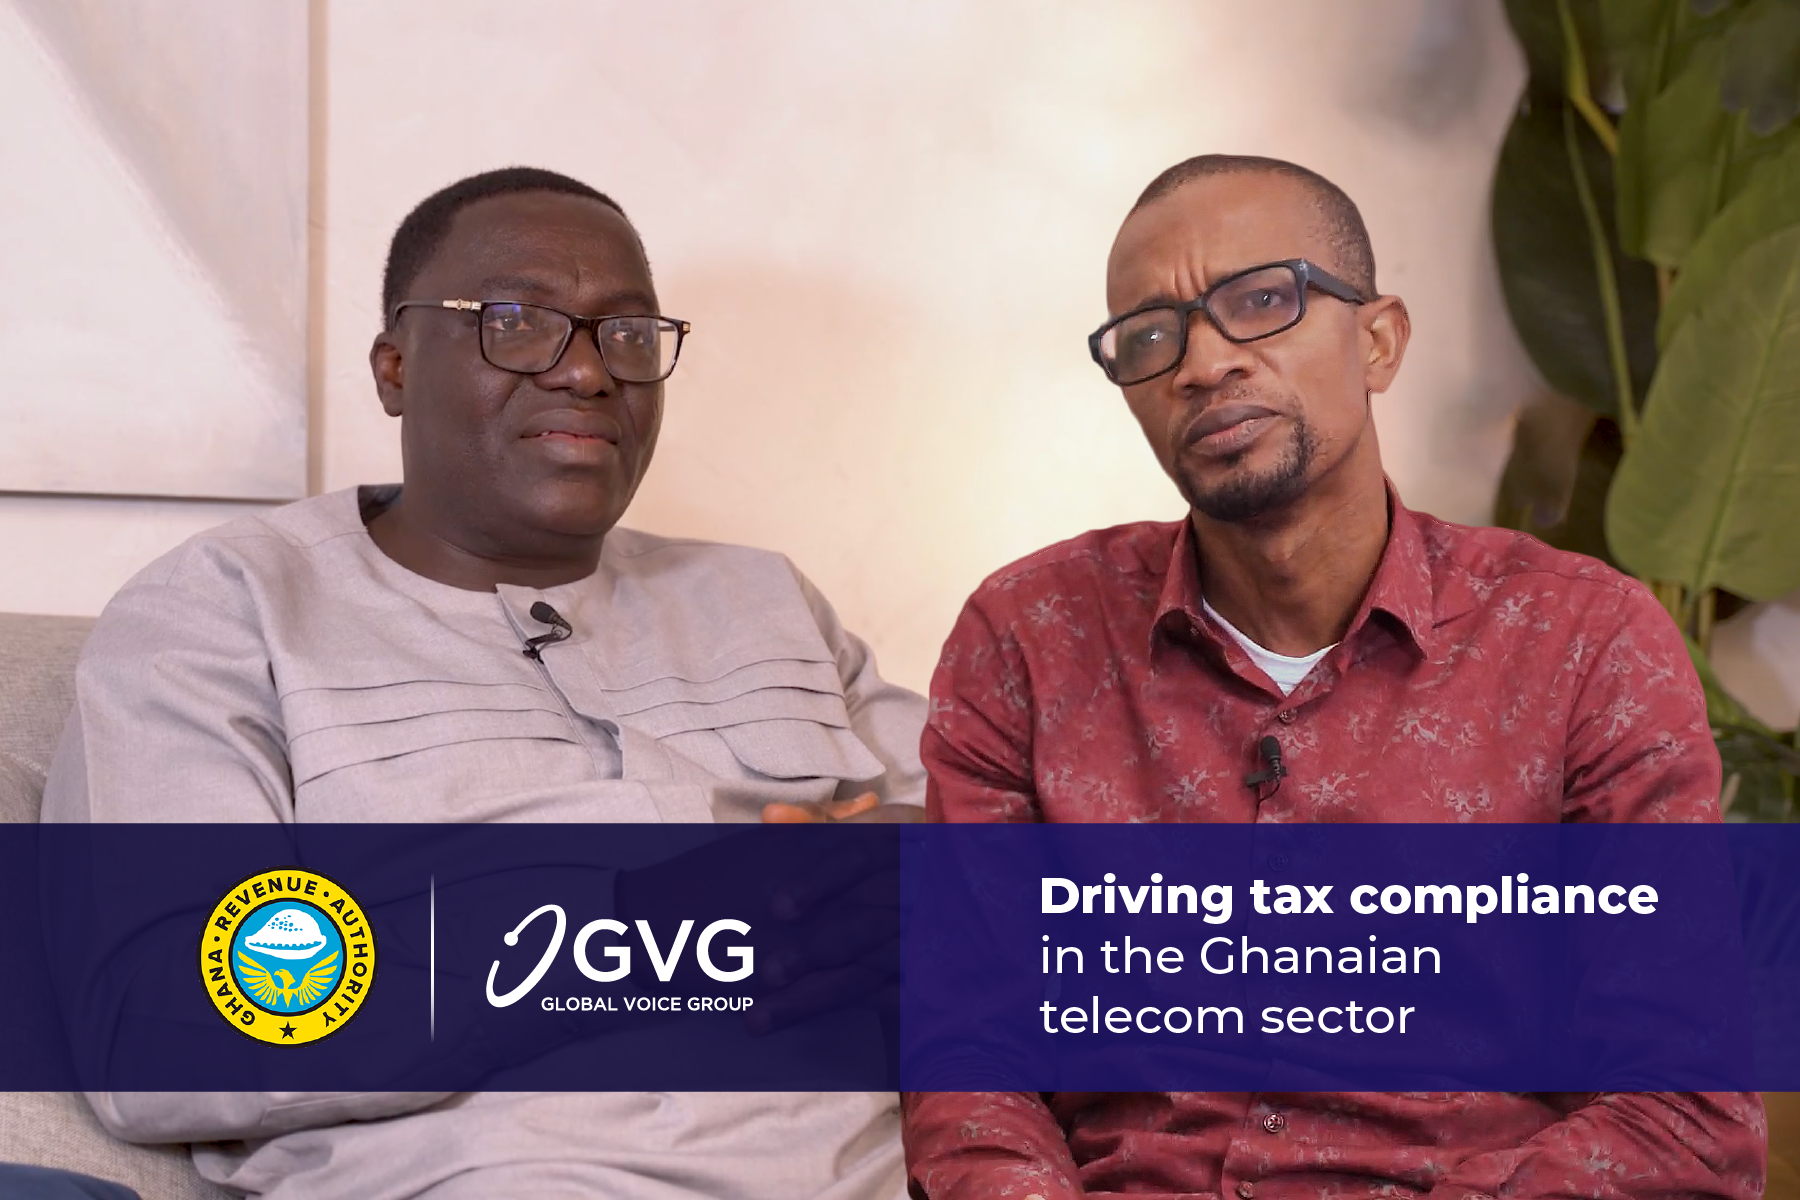 tax compliance in the Ghanaian telecom sector